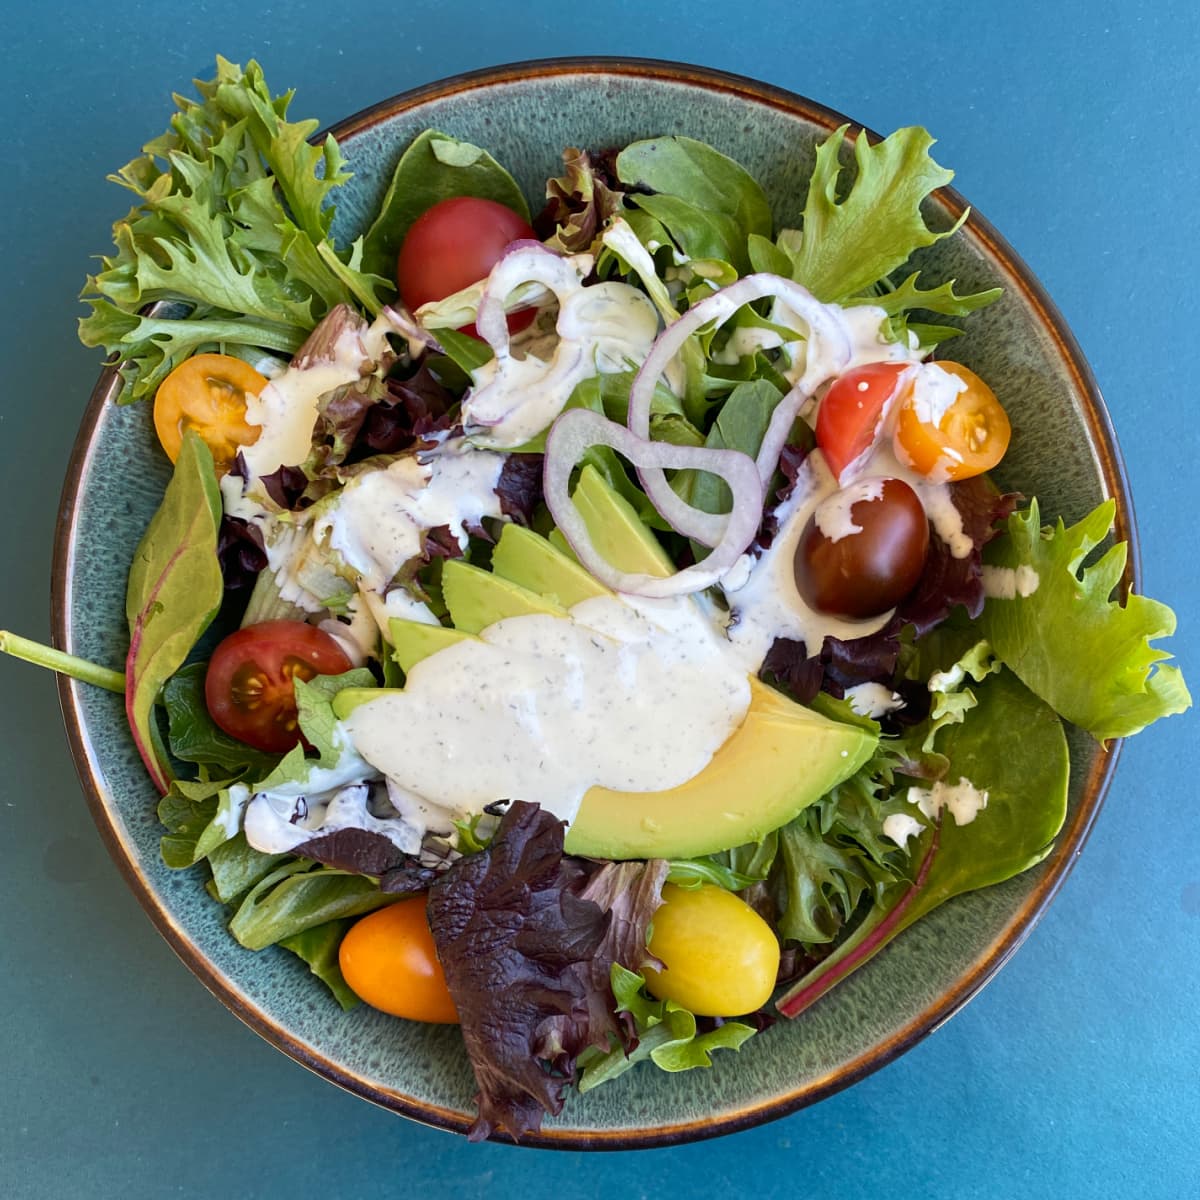 Green salad on plate, with tomatoes, avocado, and topped with fresh ranch dressing. 